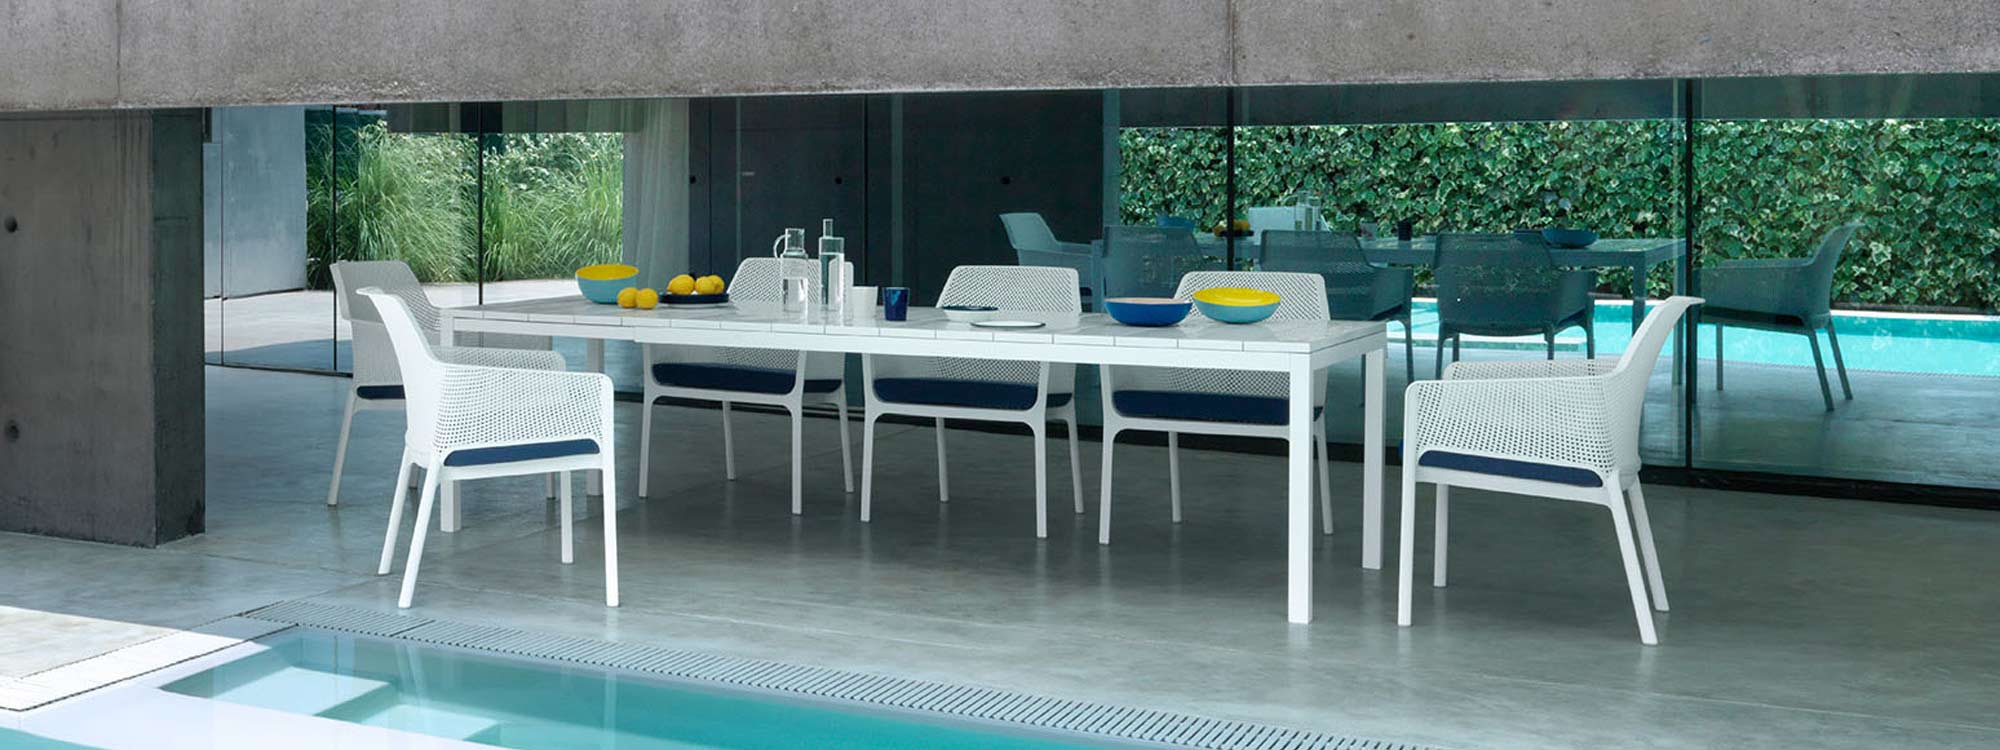 Image of white next garden chairs and white Rio extending garden table by Nardi, shown on minimalist poolside